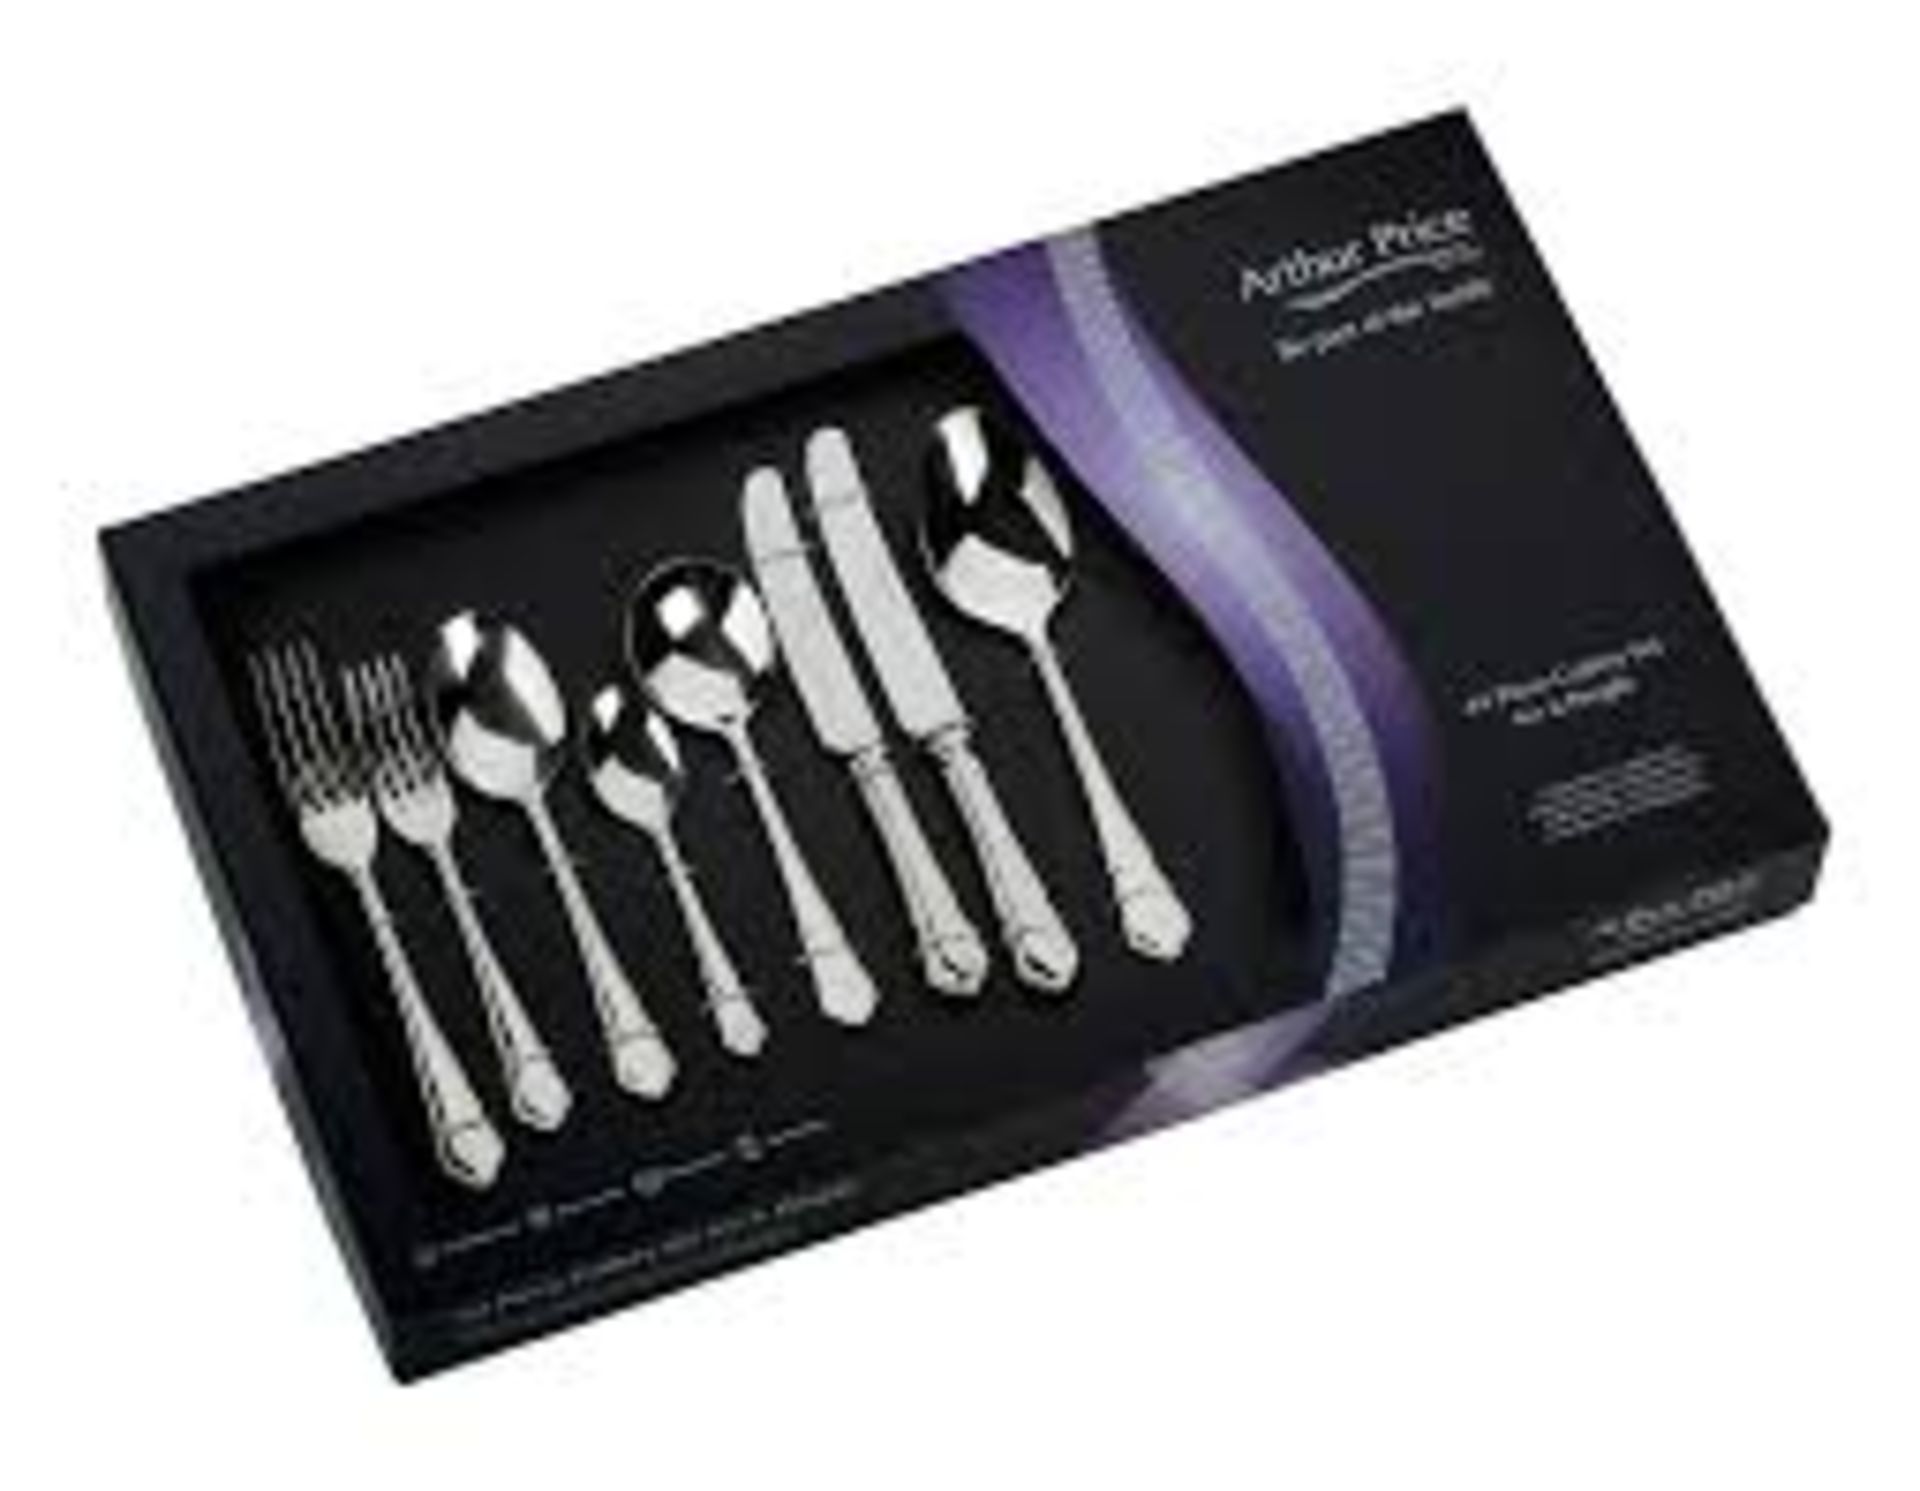 Boxed Arthur Price 44 Piece Cutlery Set RRP £140 (14734) (Public Viewing and Appraisals Available)